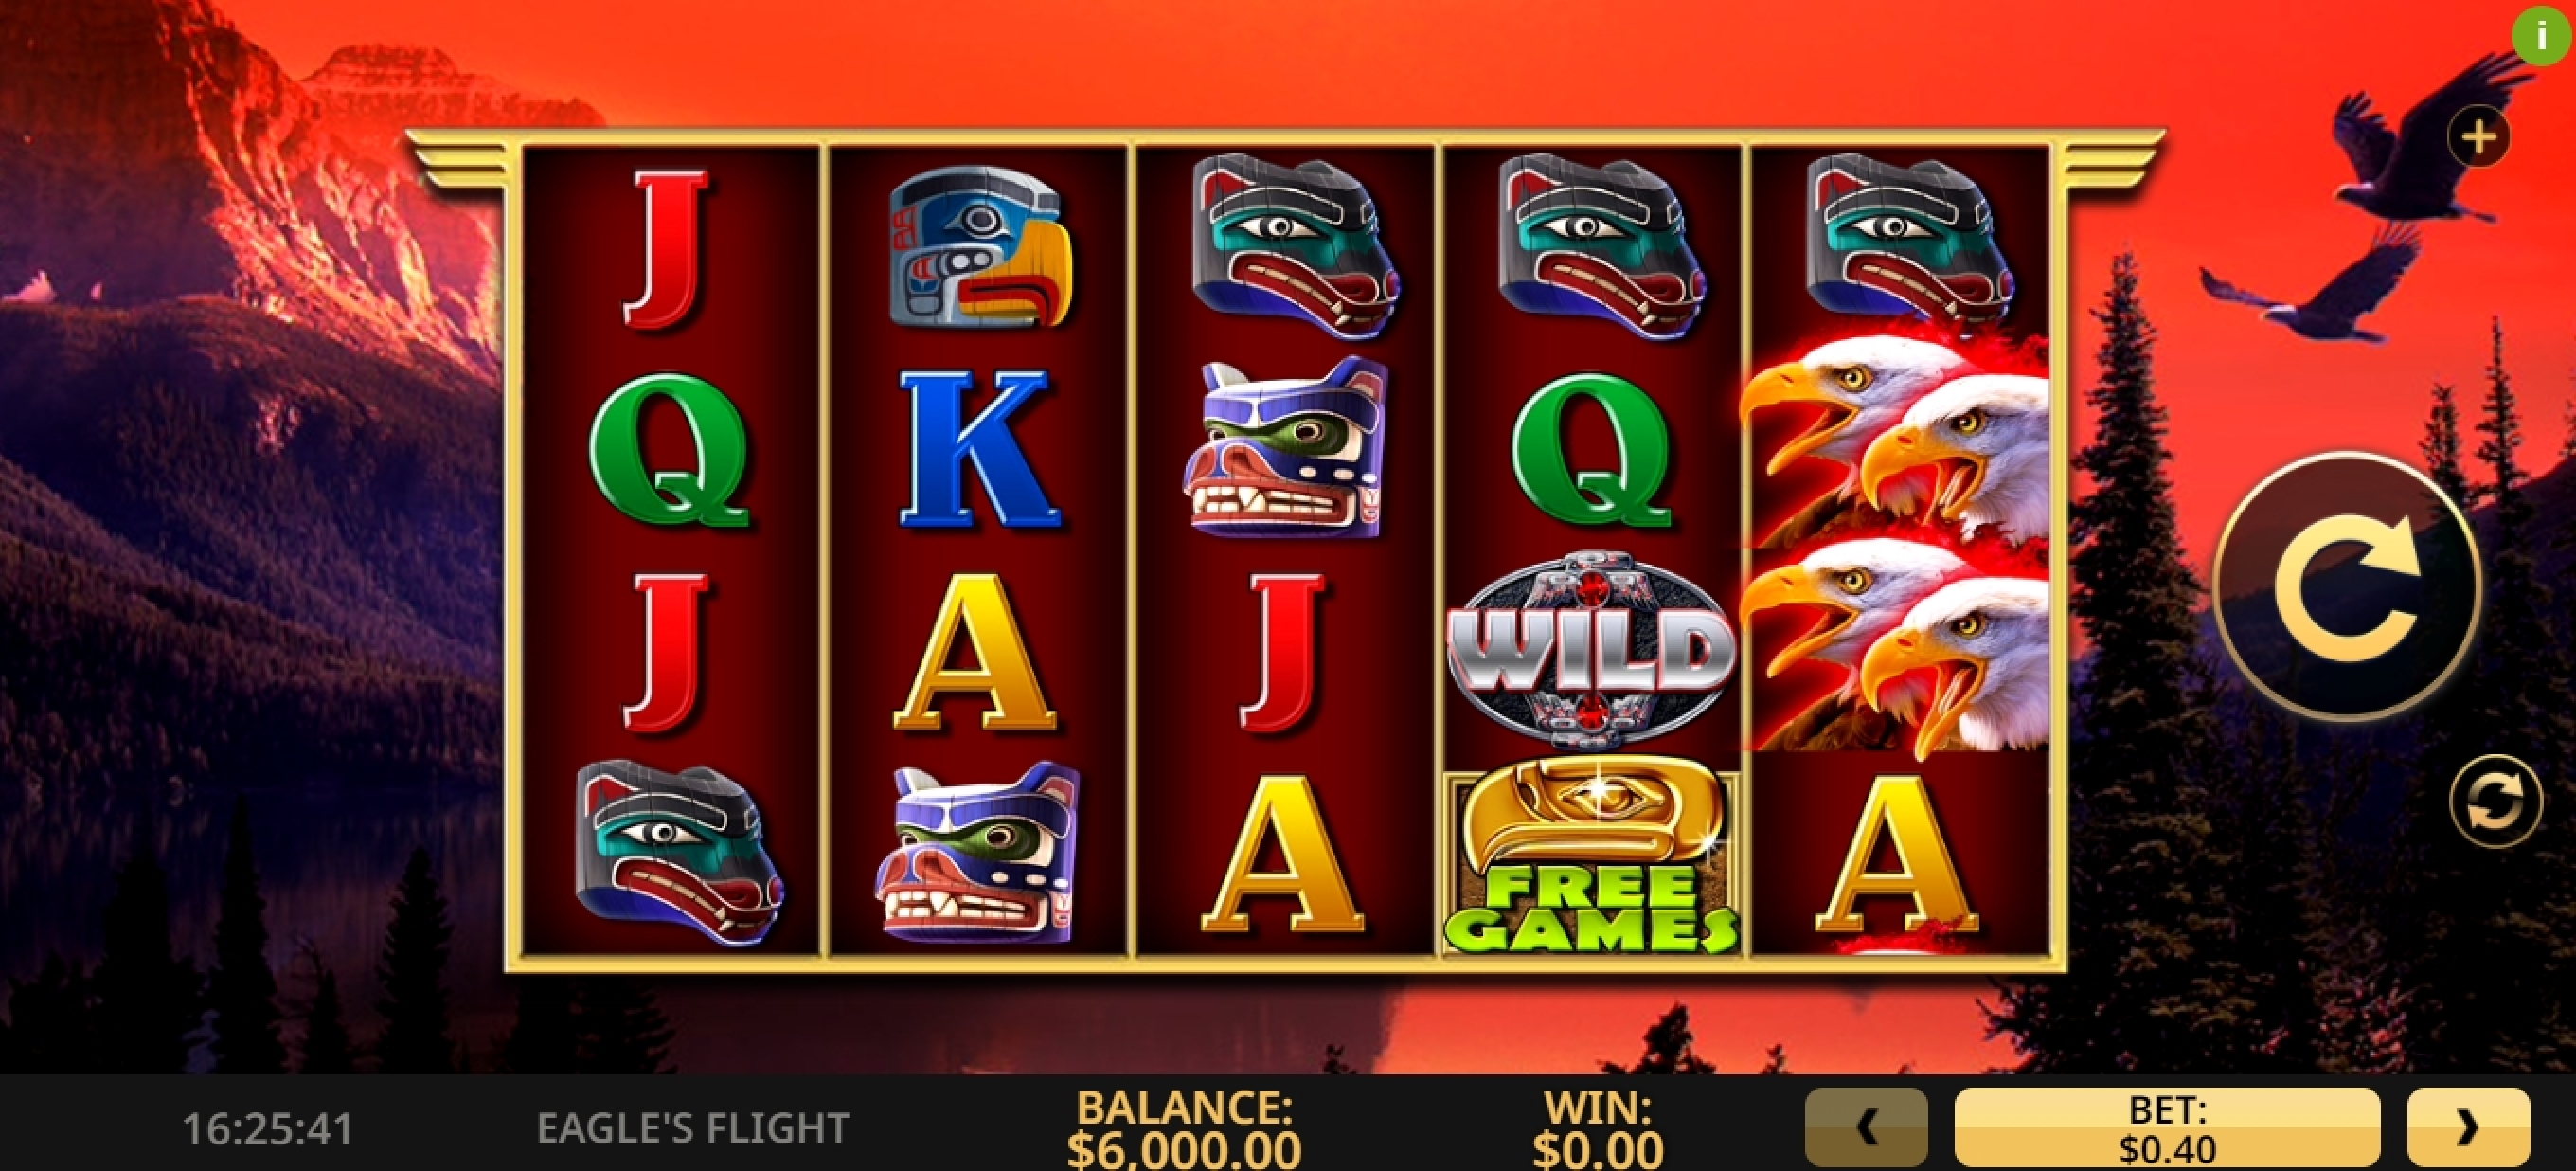 Reels in Eagles' Flight Slot Game by High 5 Games